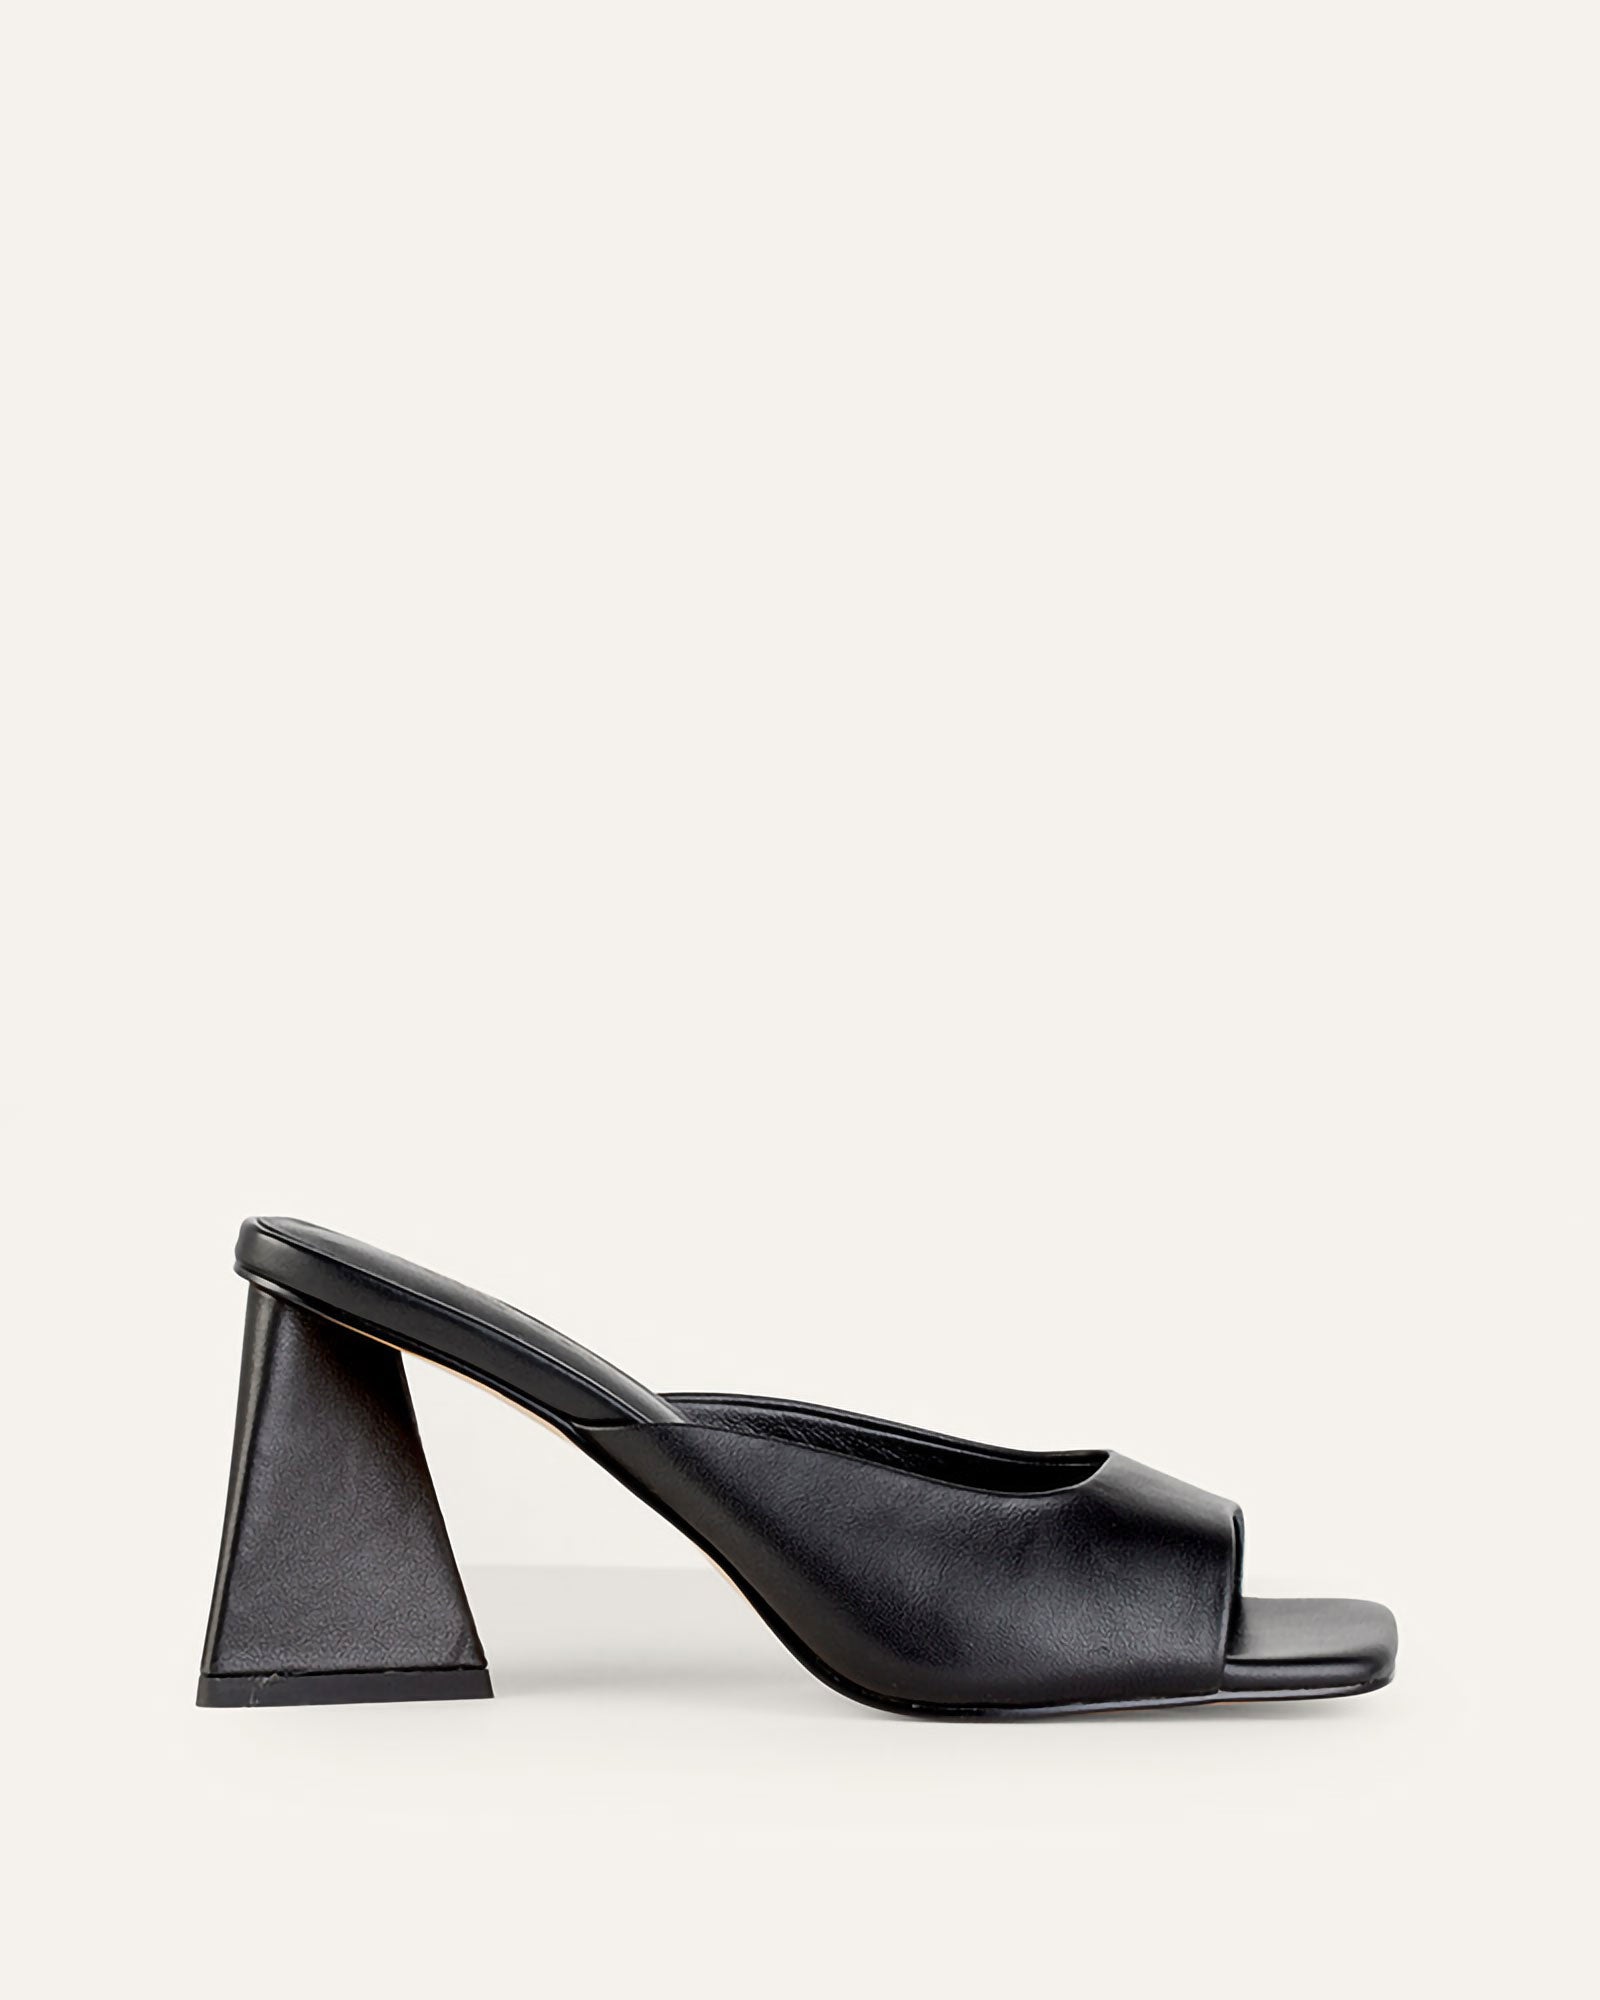 Women's open-toe curved heel offers stylish elegance and comfort.